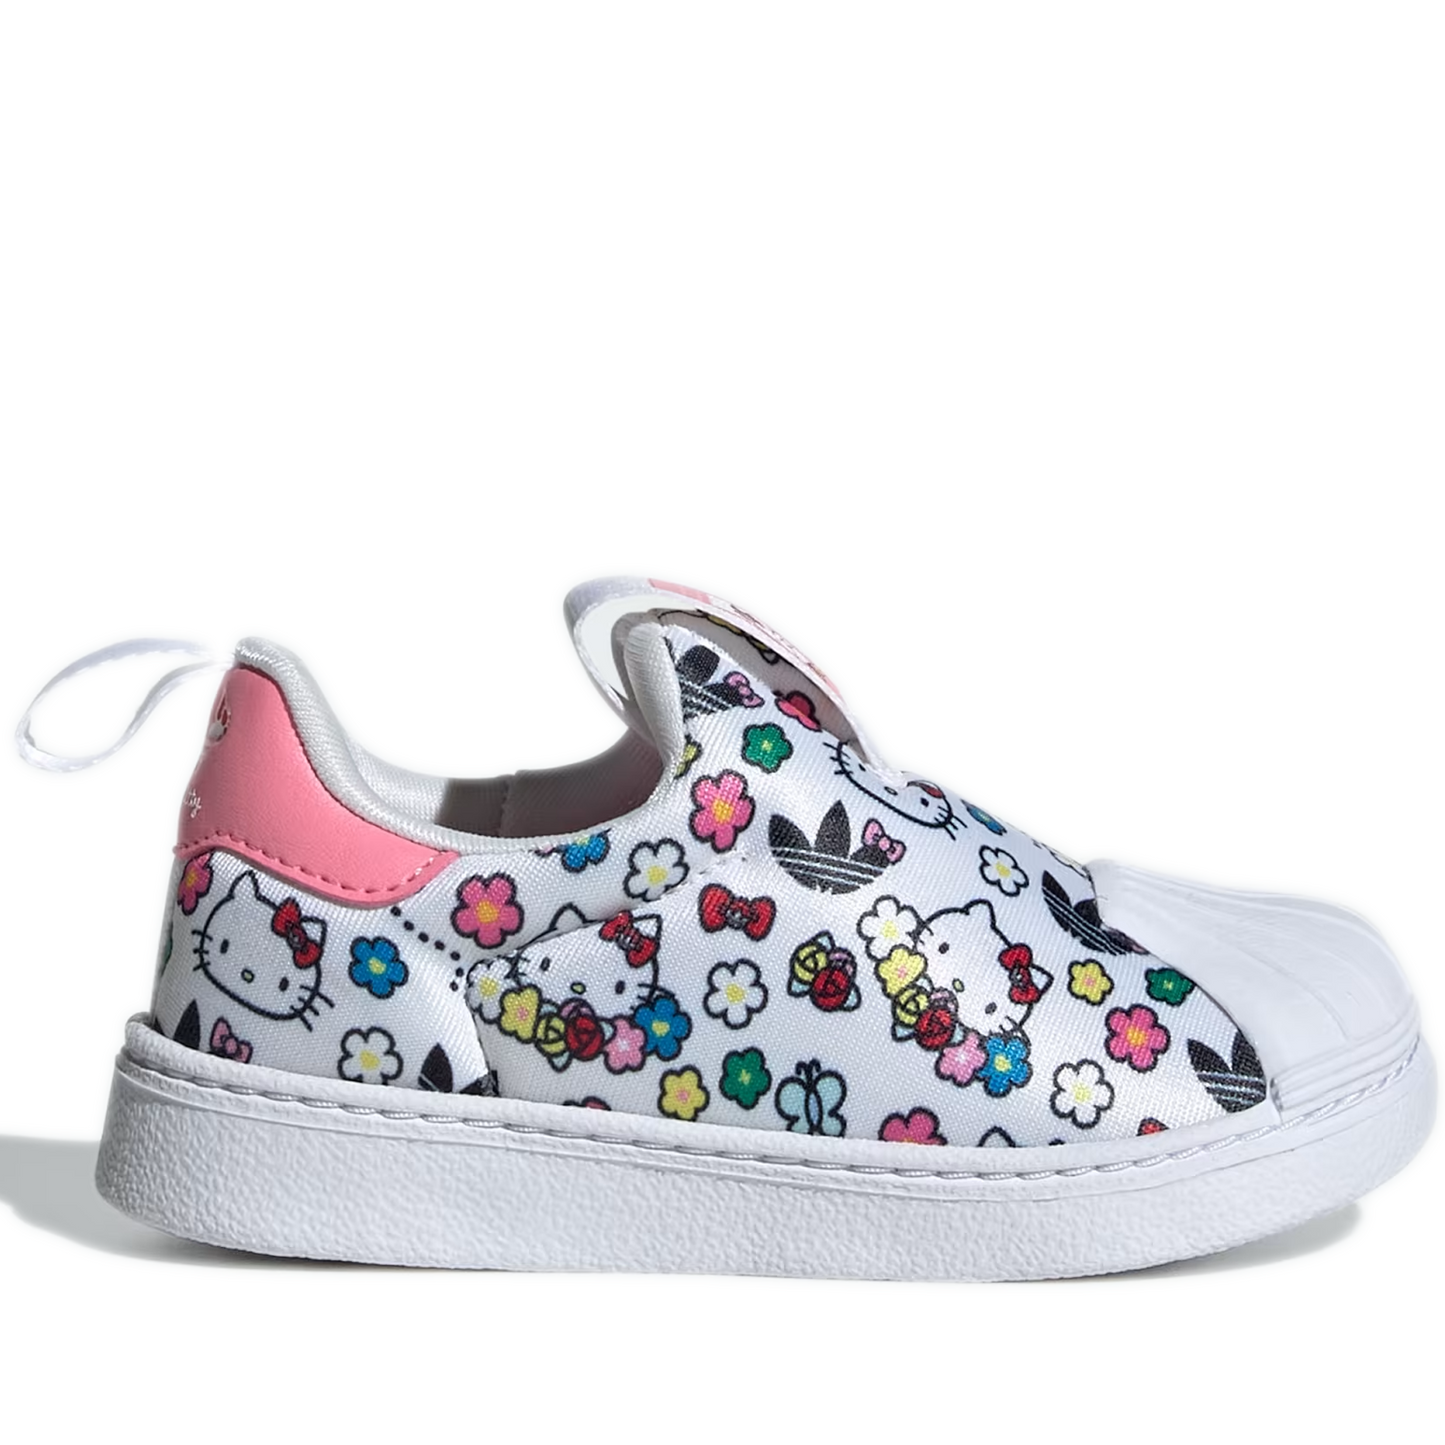 Infant's Adidas Hello Kitty Superstar 350 - White/ Pink